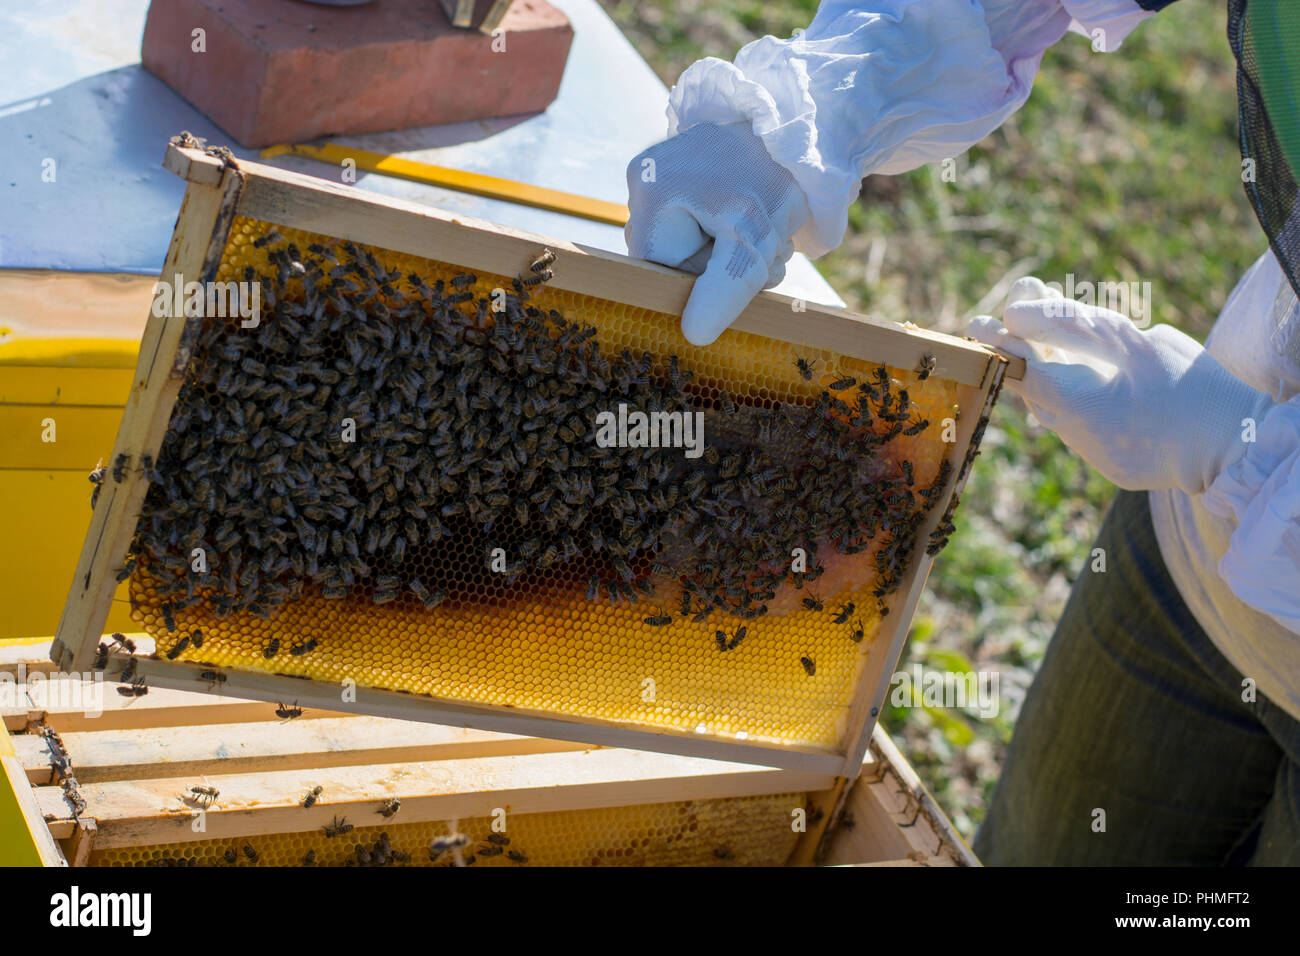 A beekeeper moves frames around inside the bee box Stock Photo